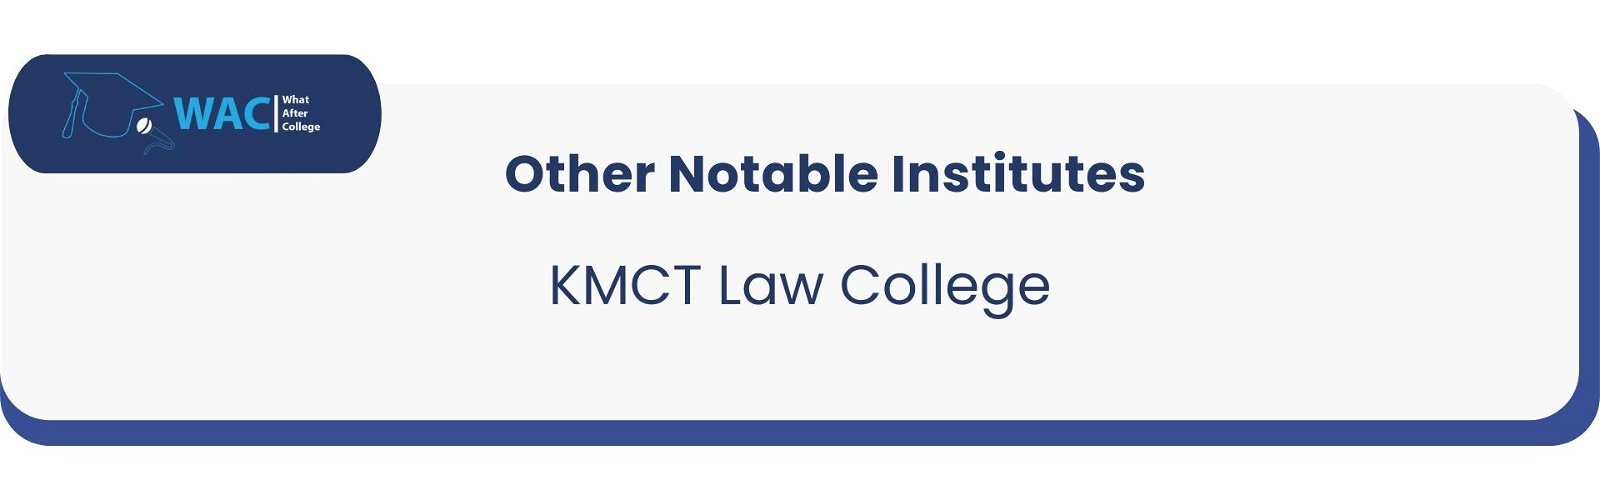 KMCT Law College